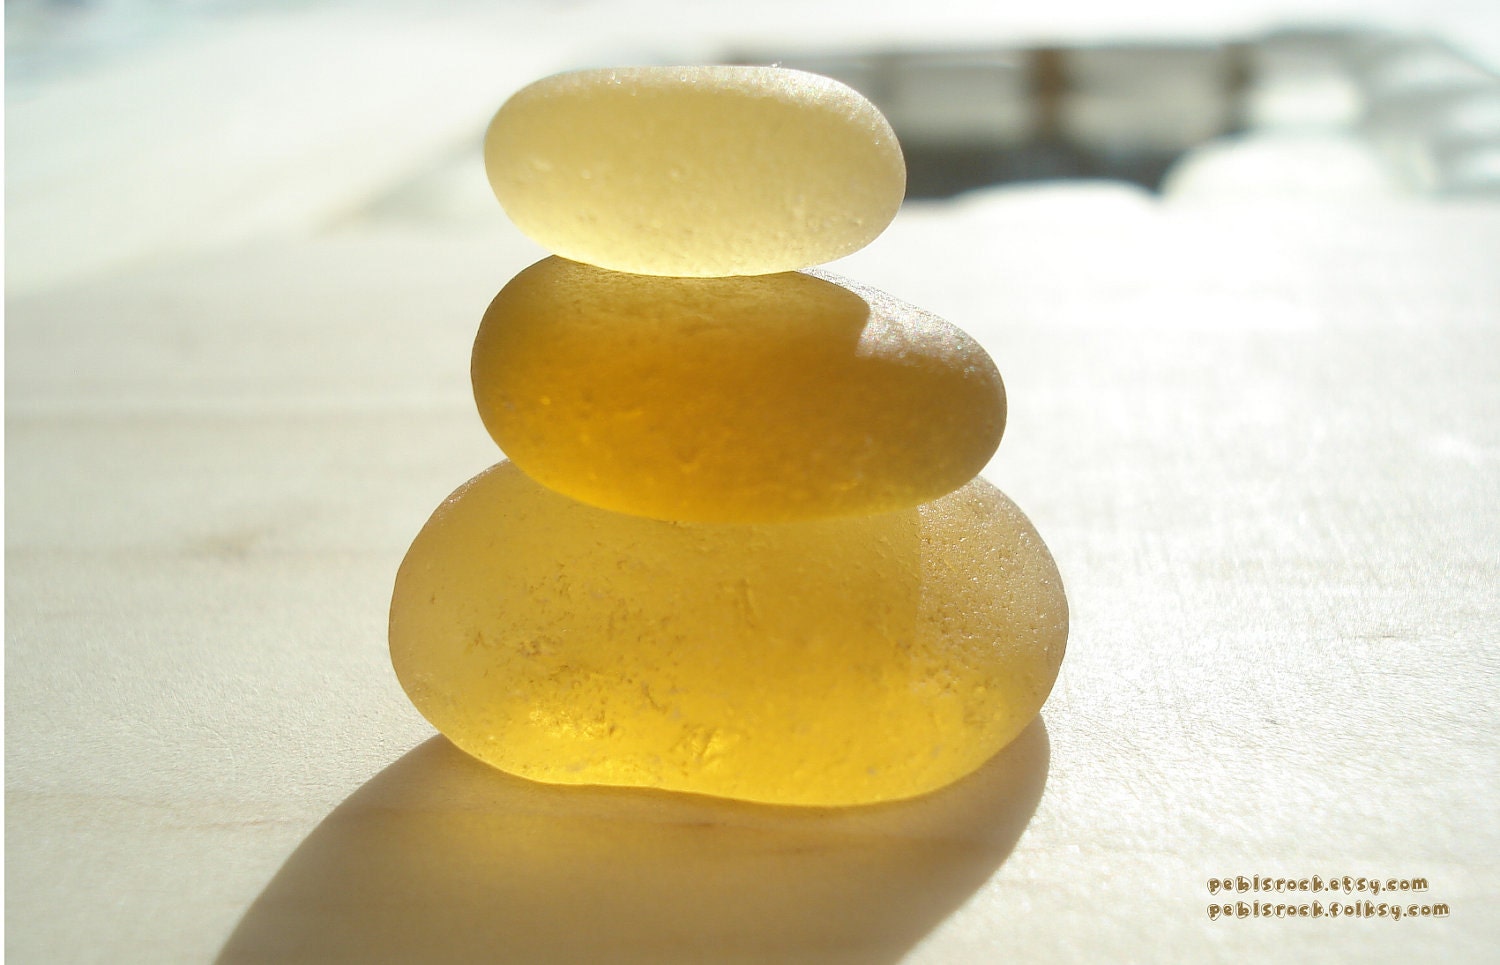 FREE and By Popular Demand - Yellow Stack of Sea Glass Art Print - From Seaham England - peblsrock